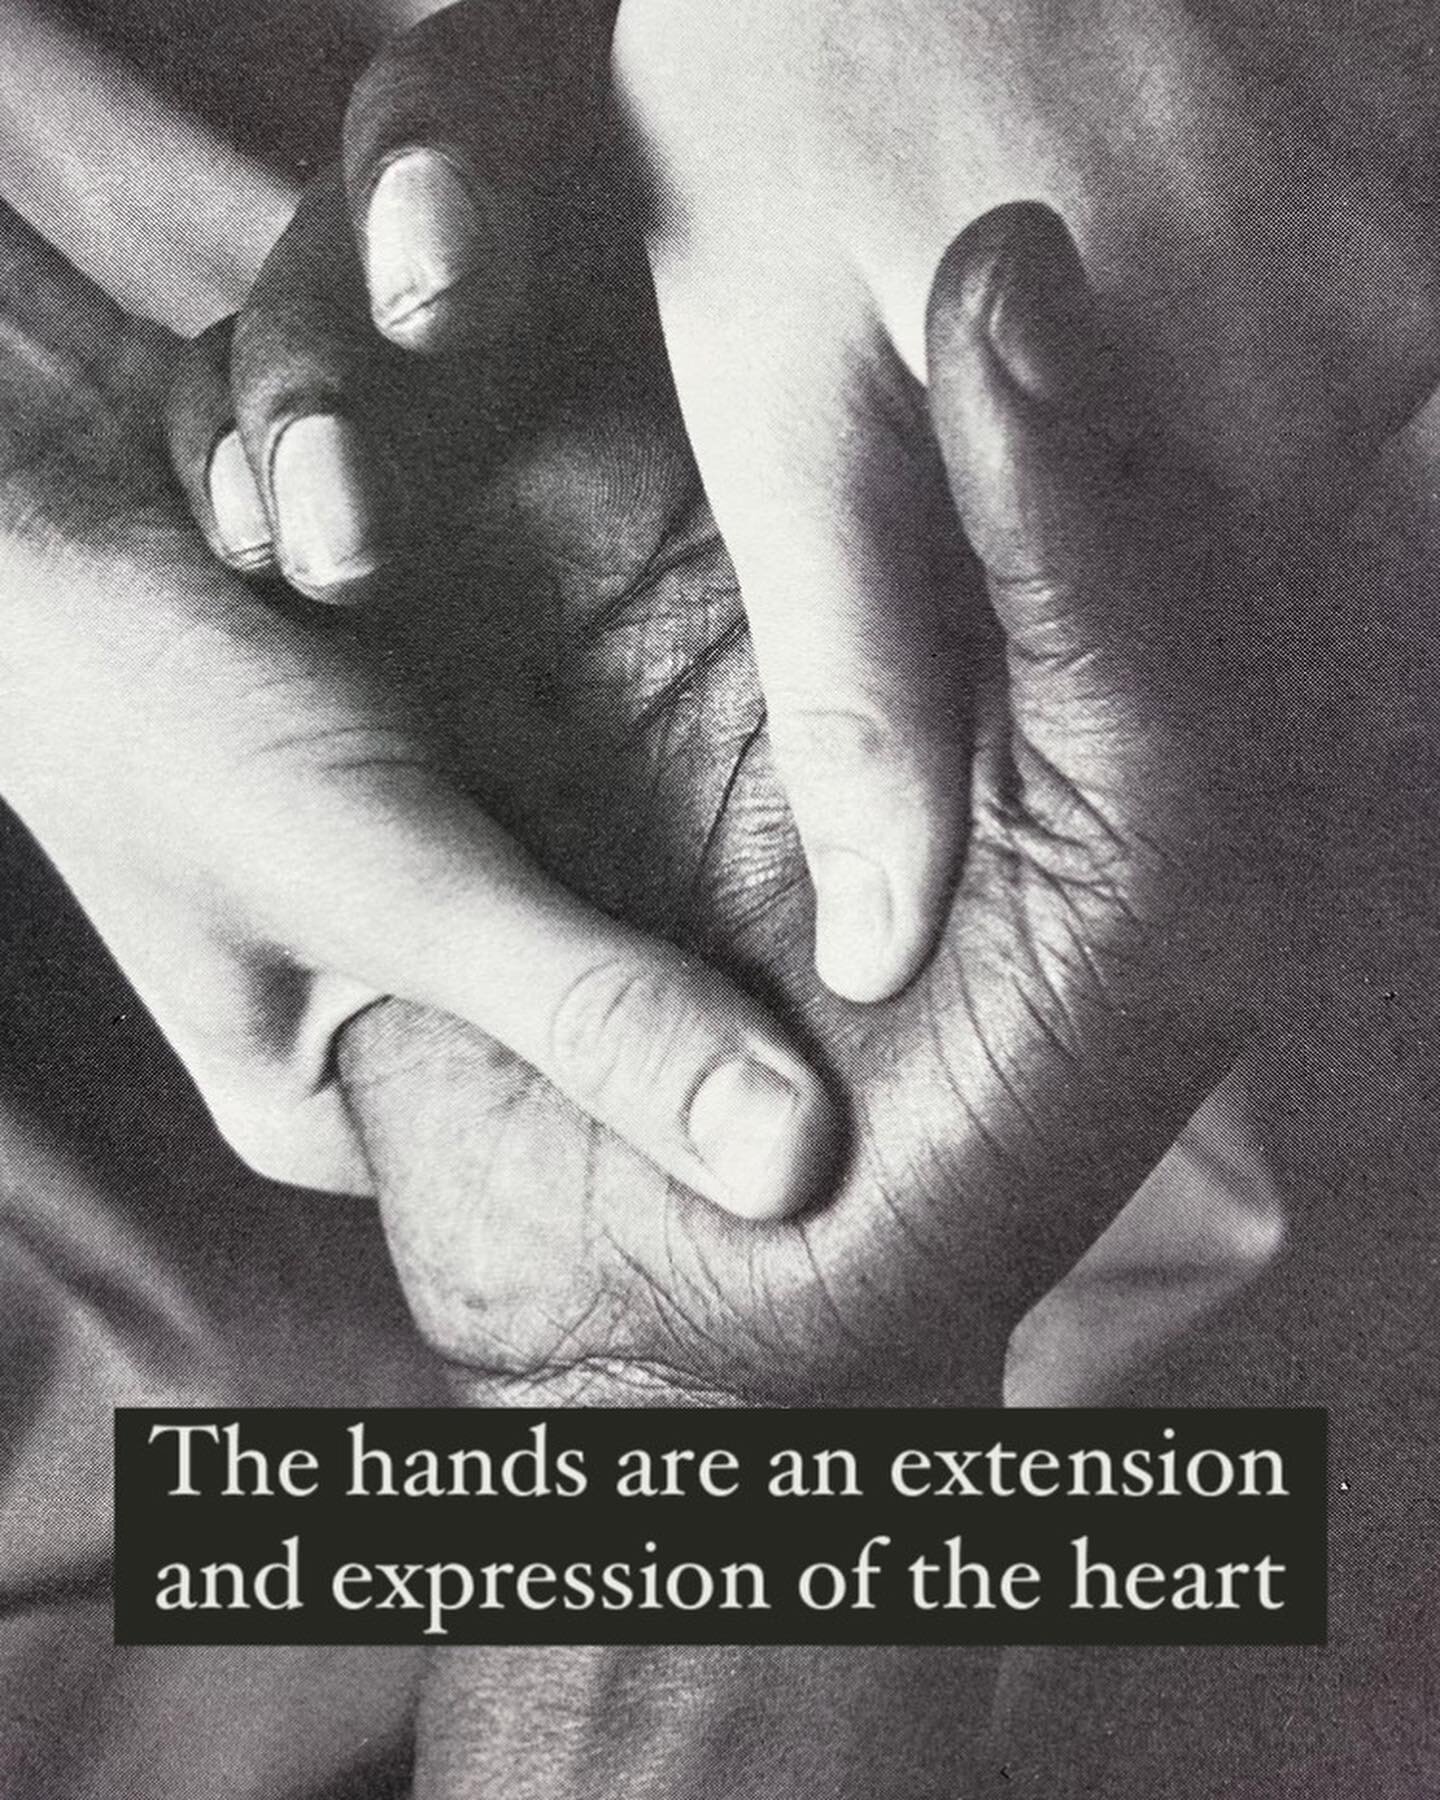 A simple hand massage not only feels delicious but is also deeply soothing to both the heart and the autonomic nervous system. Touching the hands has a direct connection to the heart through the heart meridian and can be a powerful pathway to calming